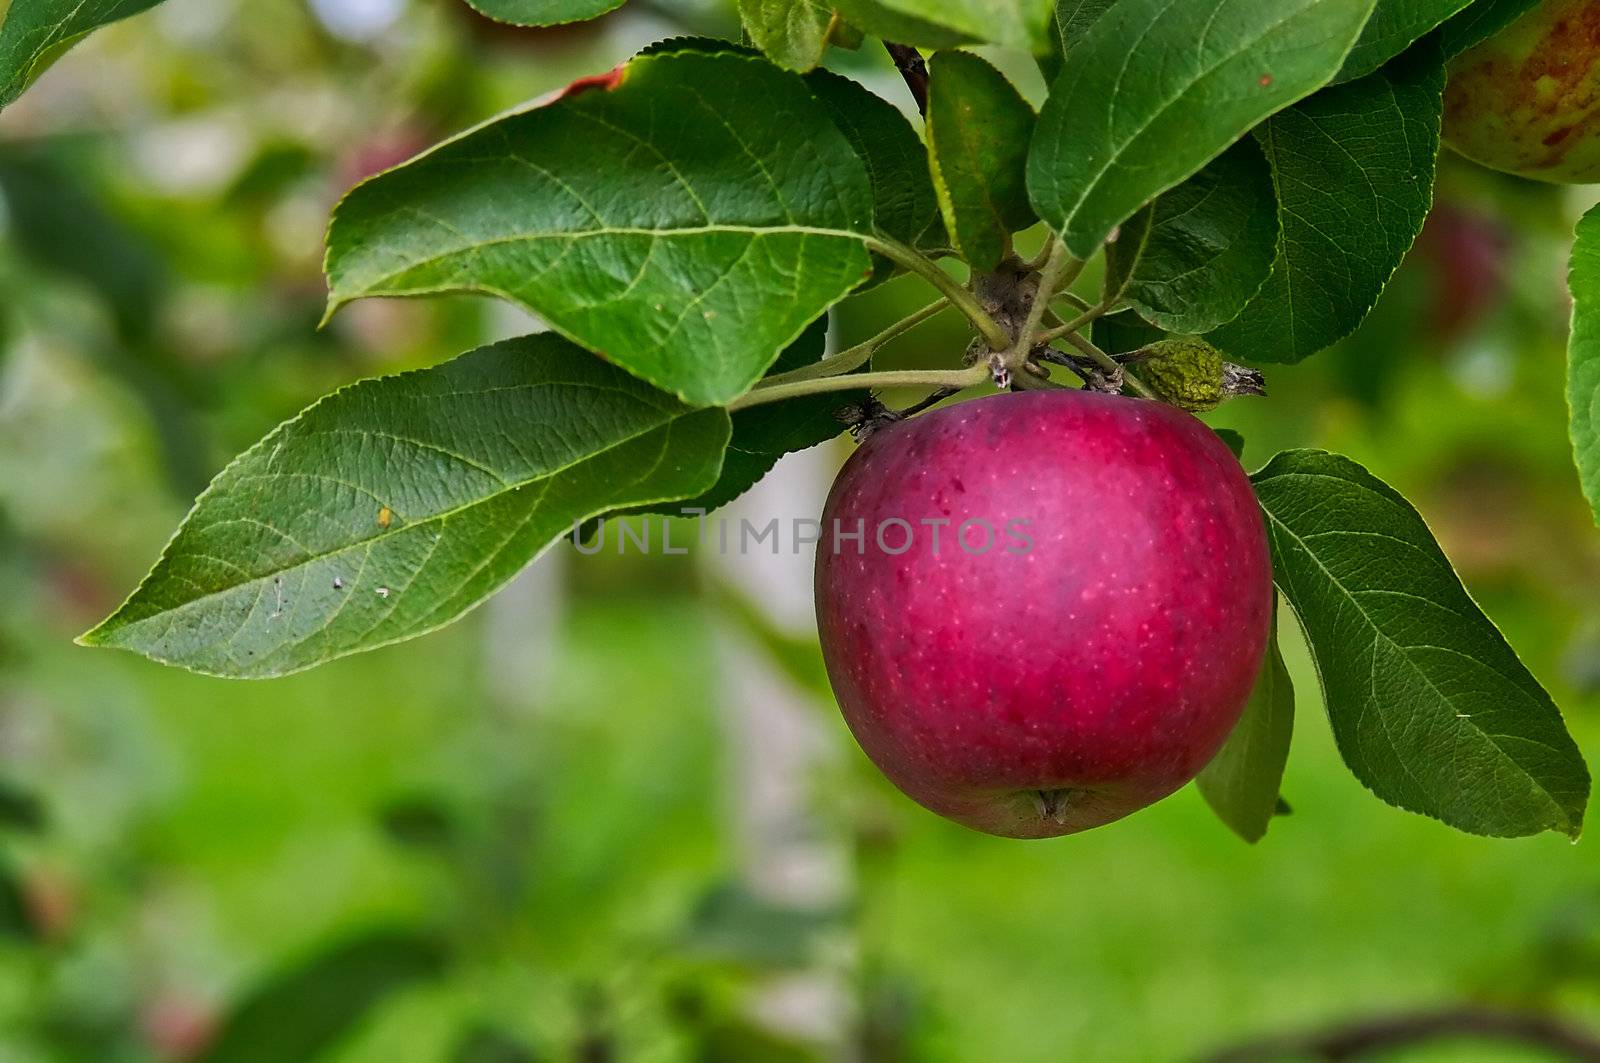 Shiny red apple ready to be picked